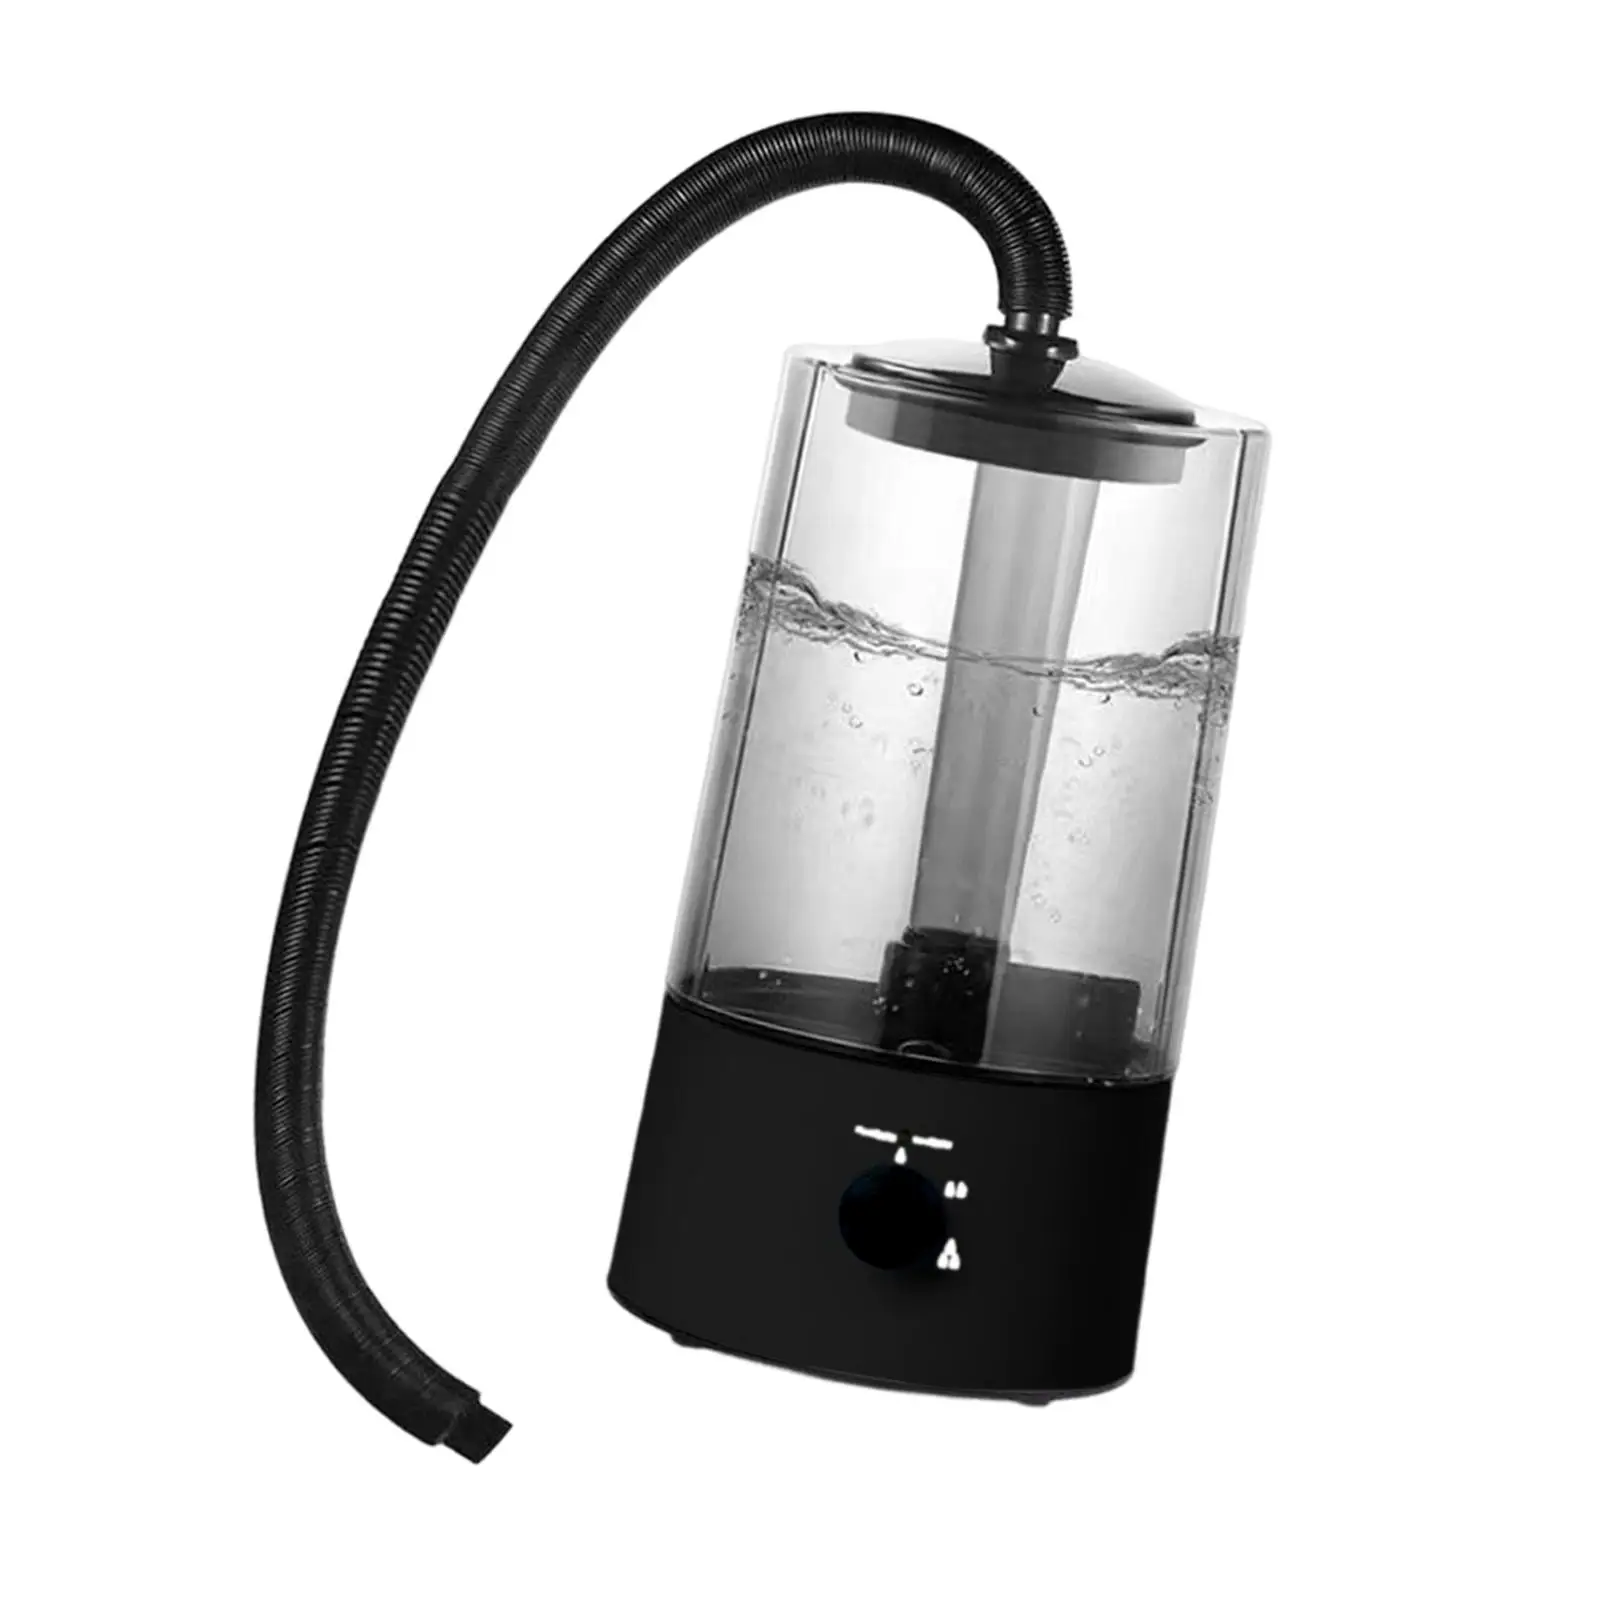 Reptile Fogger Humidifiers Mister 4 Liters US 110V Plug Professional Knob Control 25W Power with Extension Hose Fog Machine